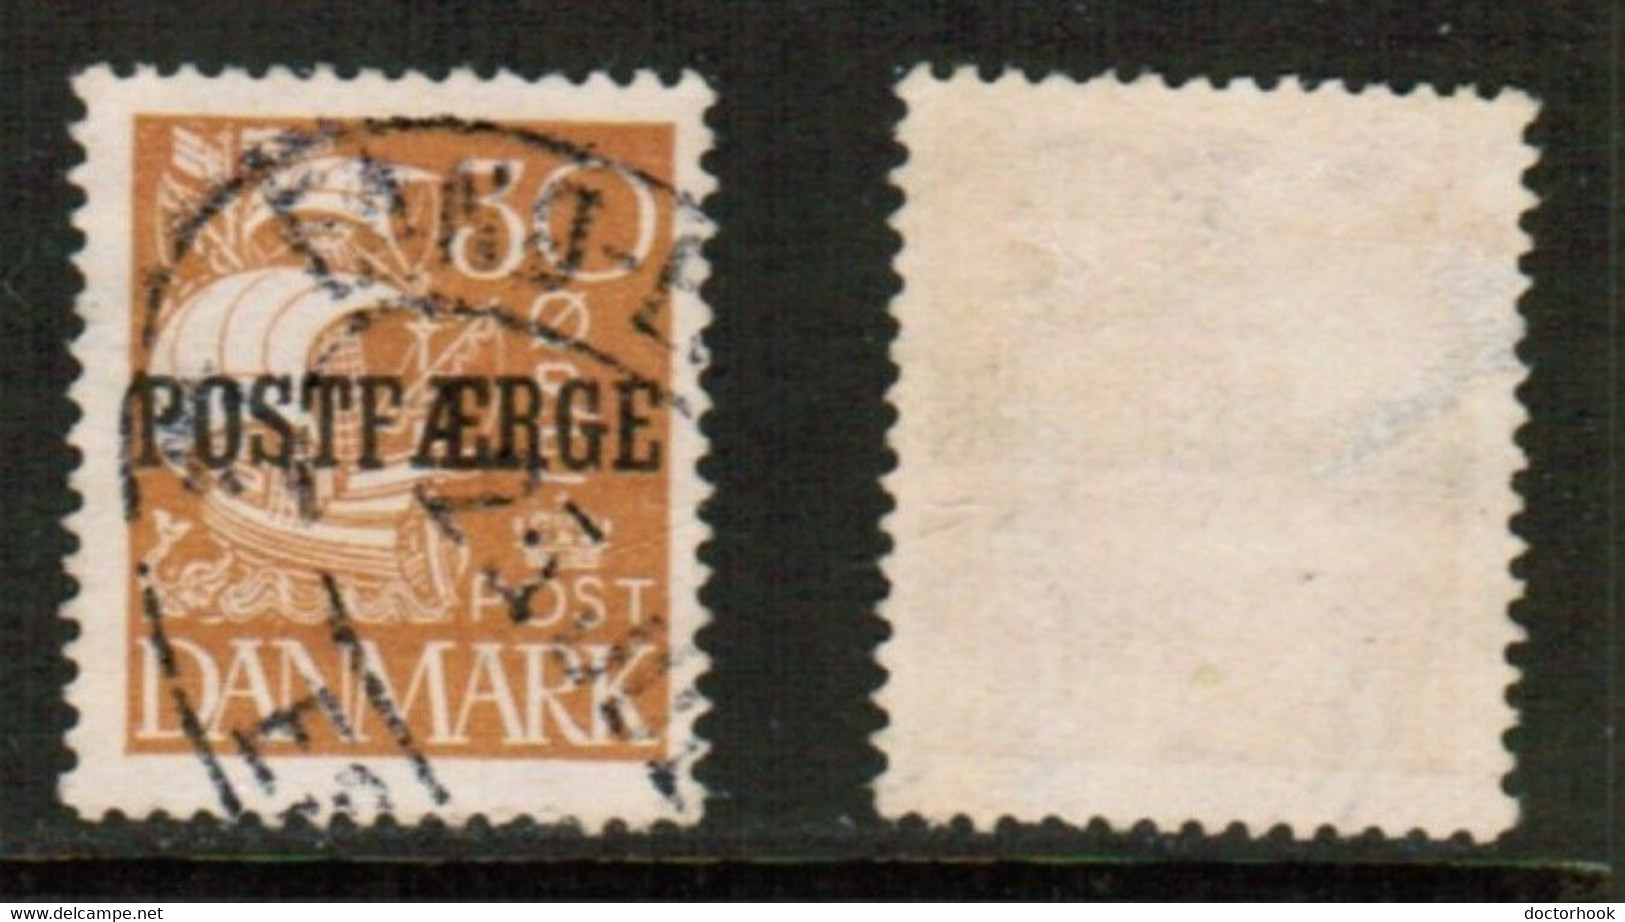 DENMARK   Scott # Q 13 USED (CONDITION AS PER SCAN) (Stamp Scan # 864-10) - Colis Postaux